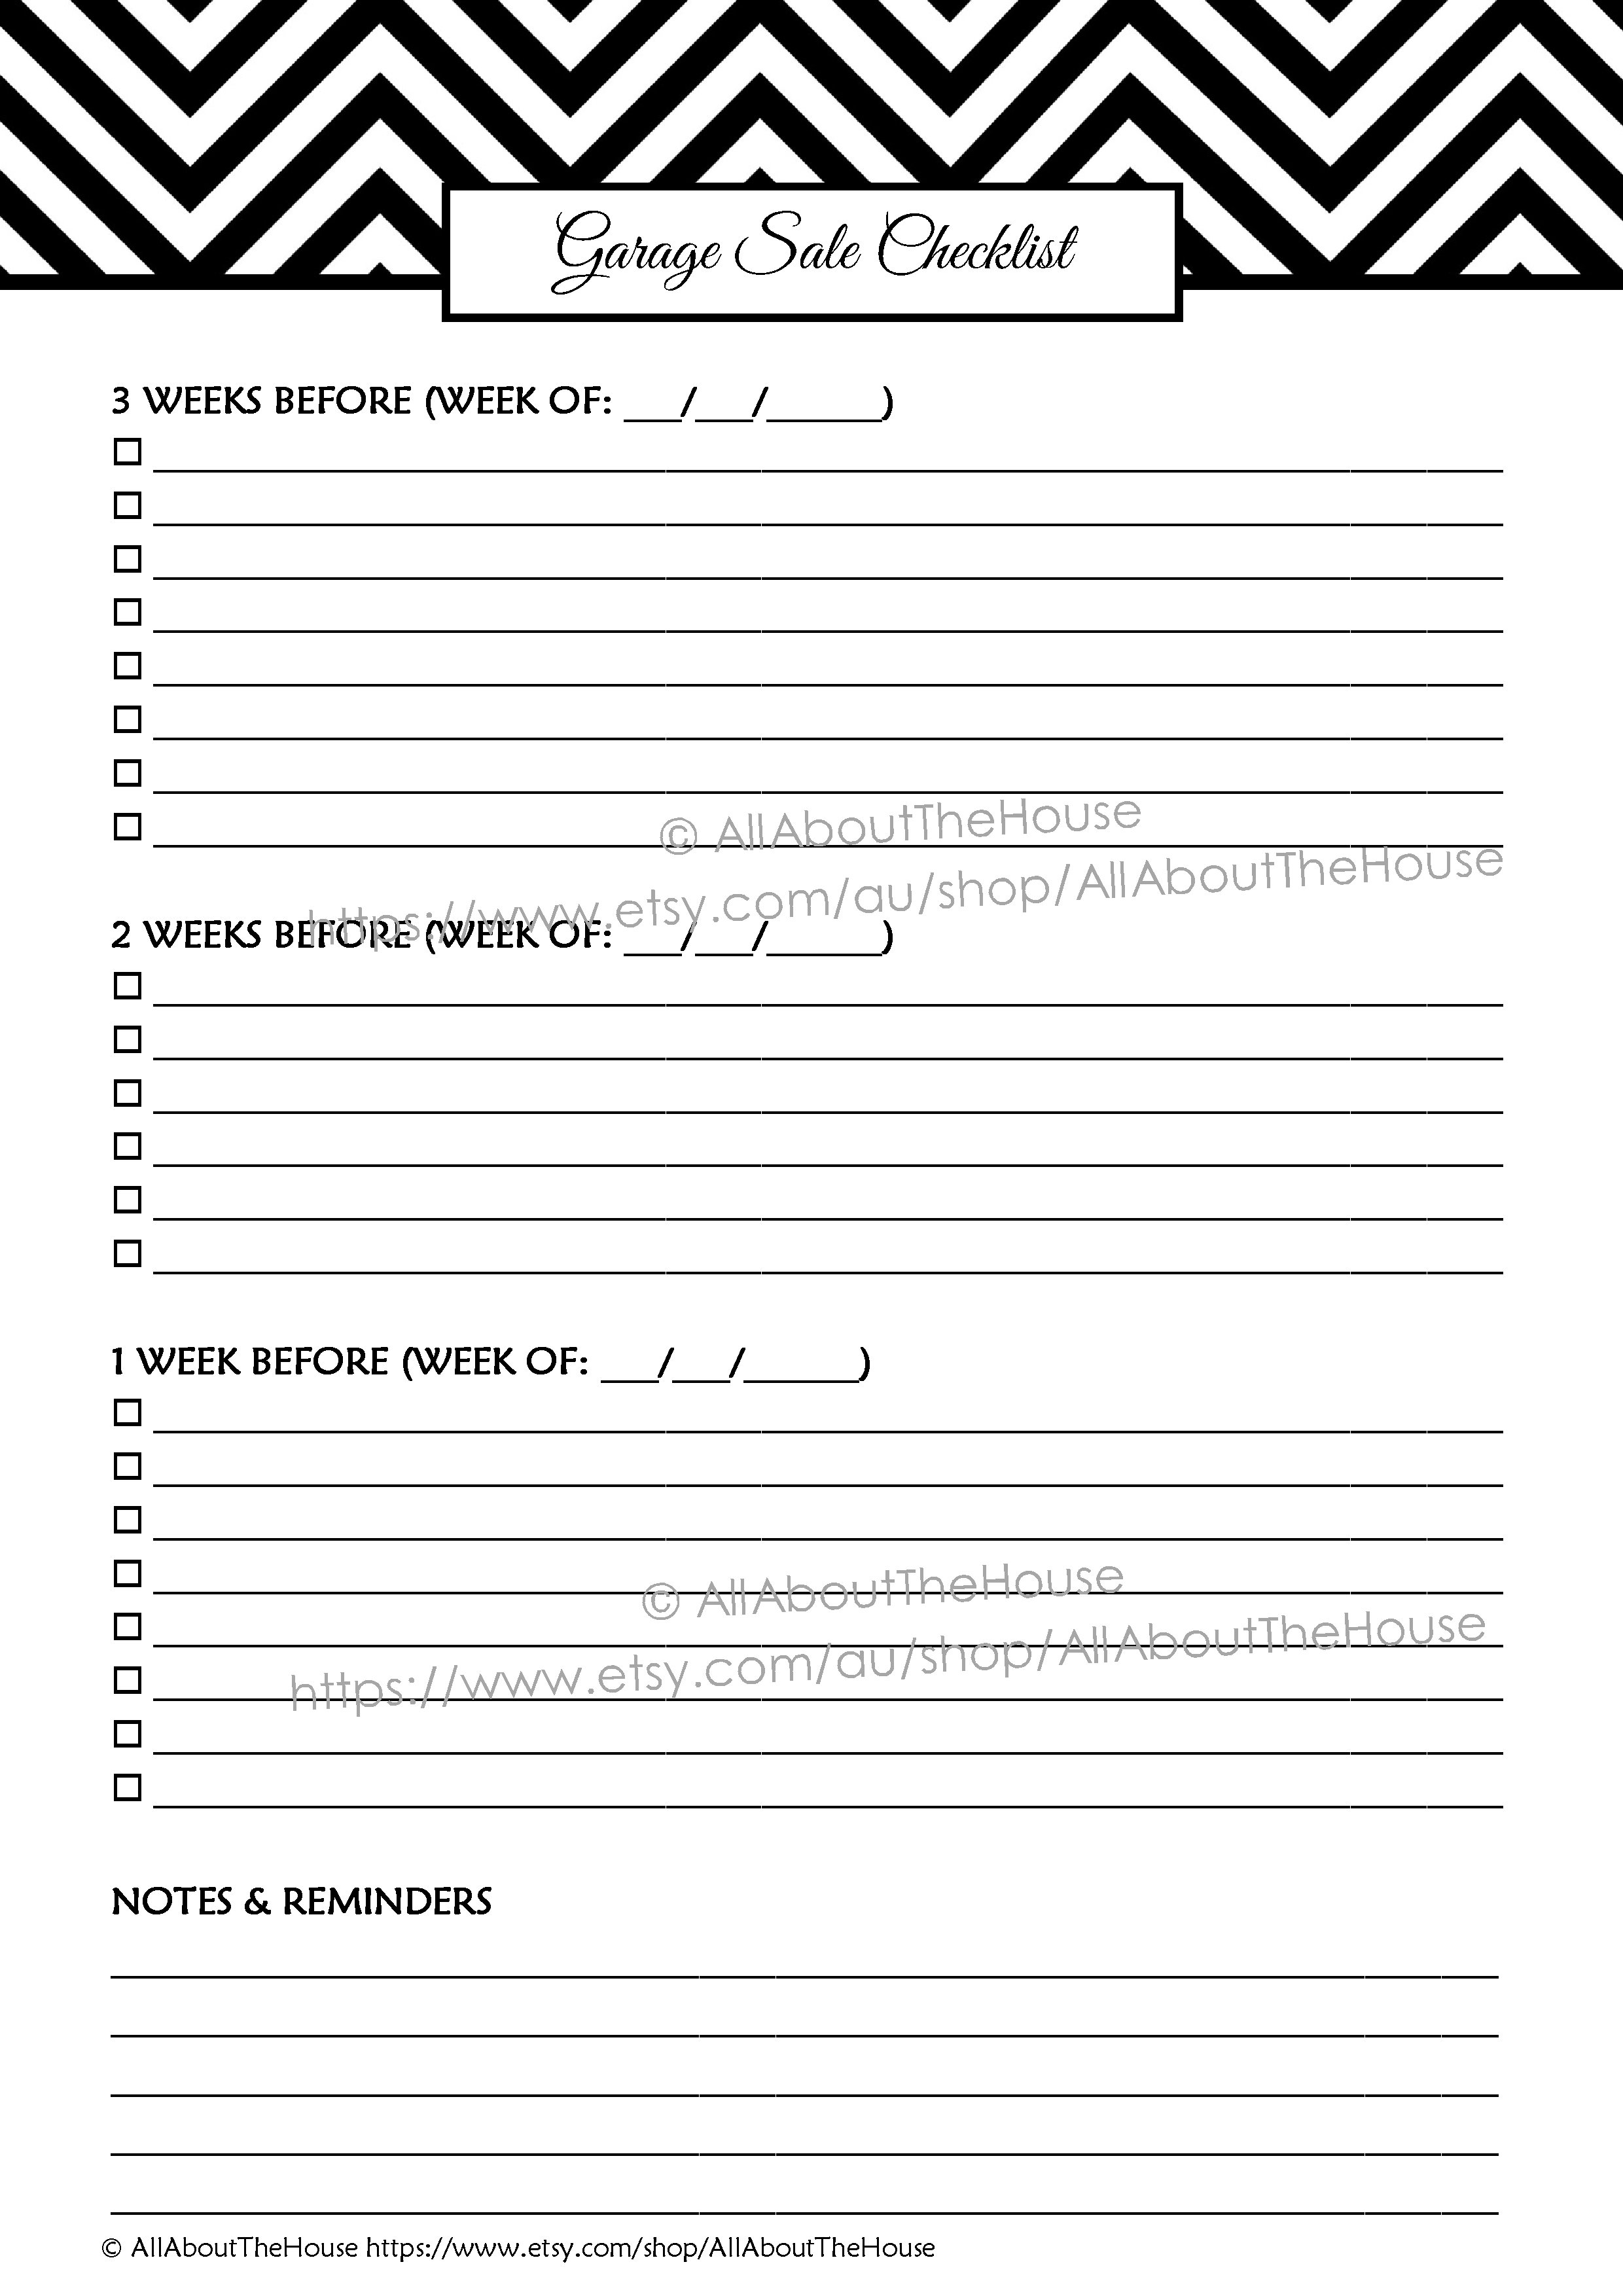 5-best-images-of-moving-checklist-planner-printable-house-moving